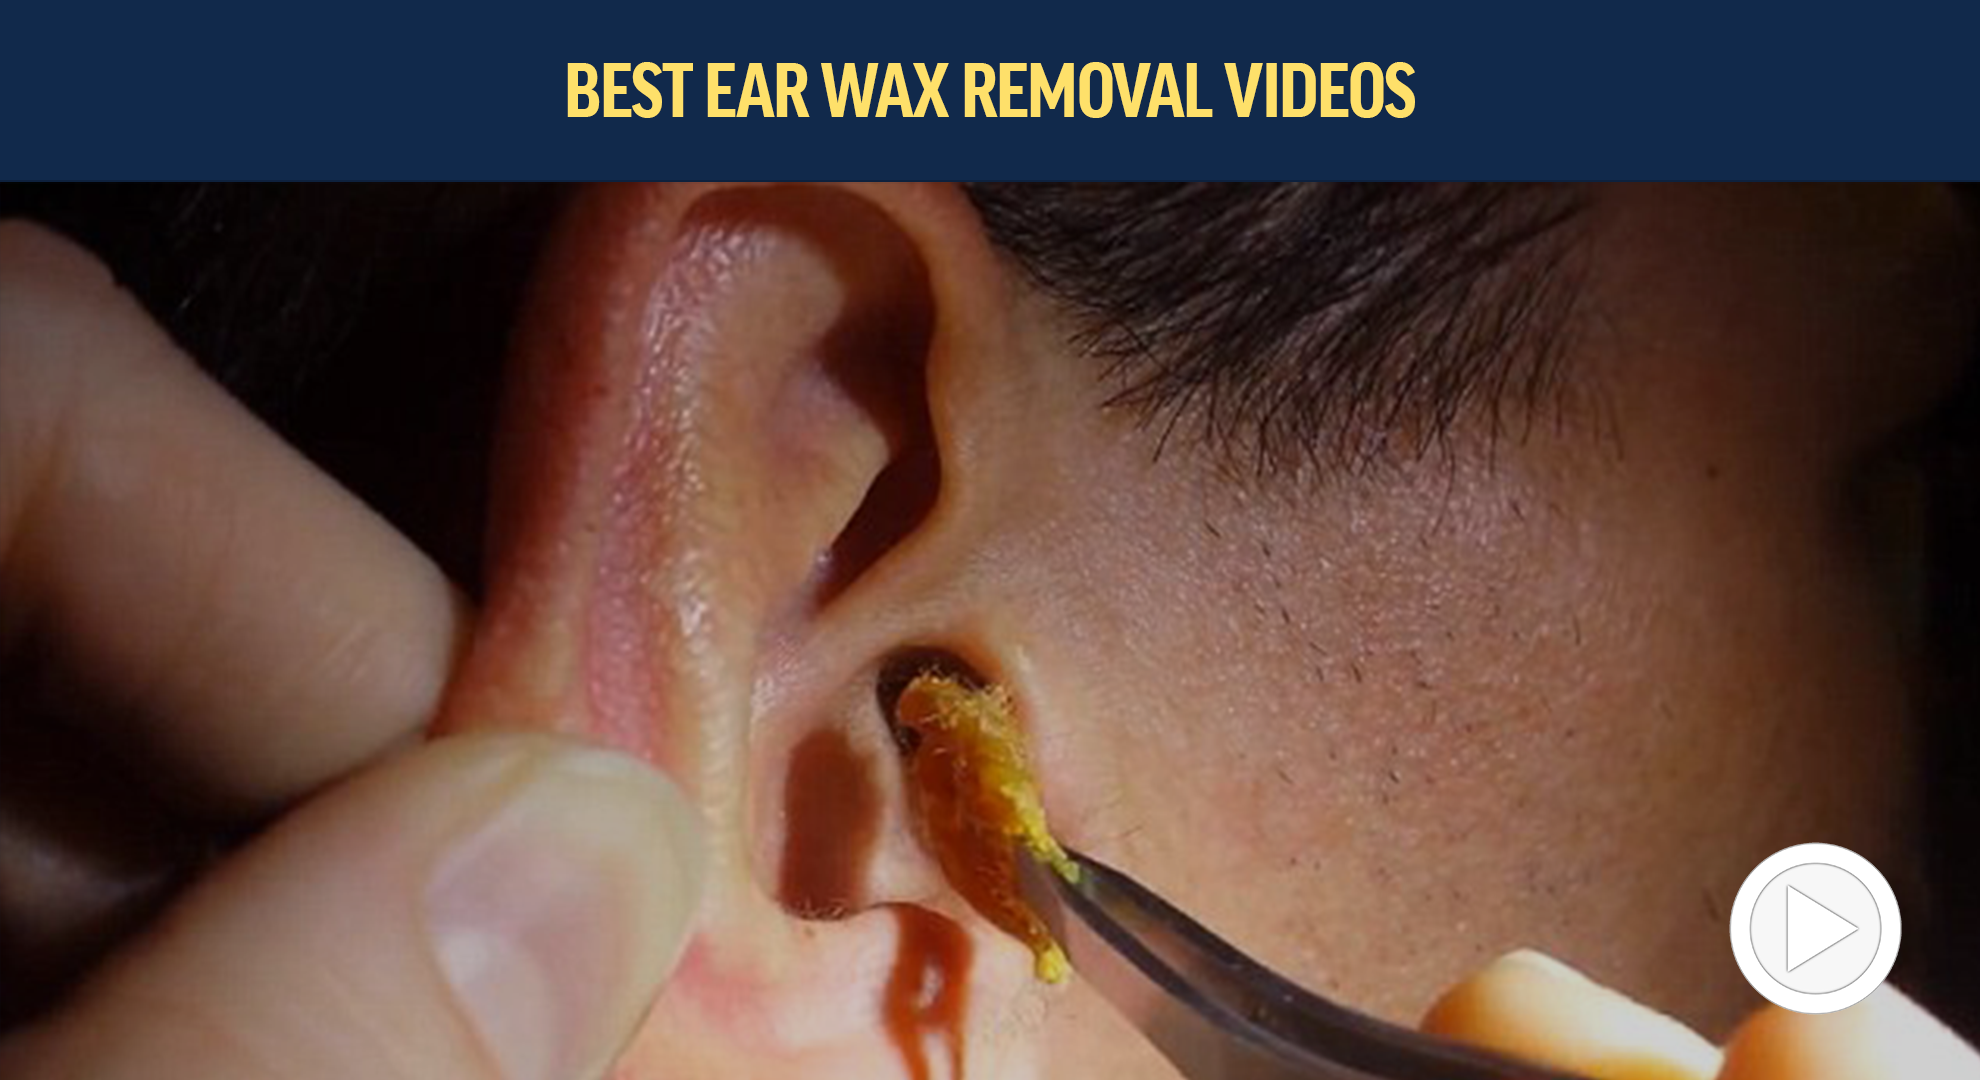 Ear wax removal - dos and don'ts you should know about